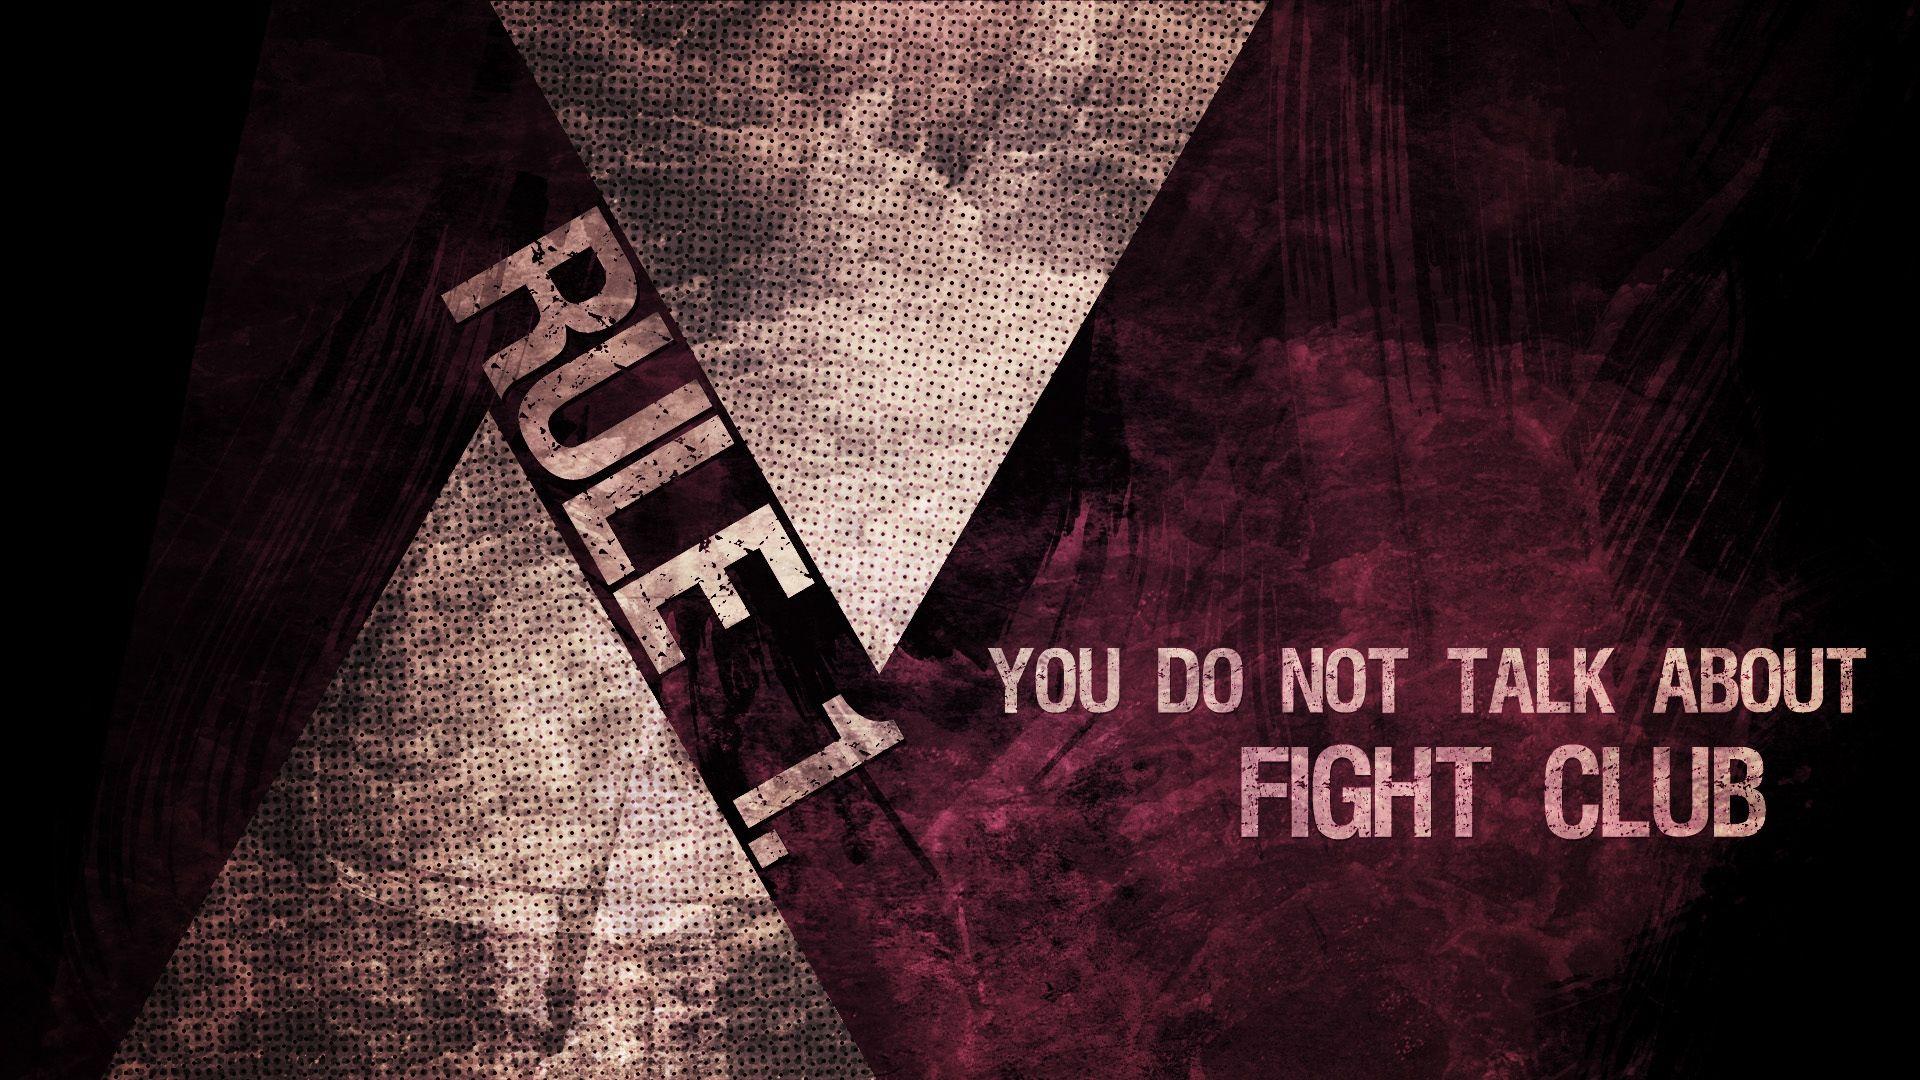 Download wallpaper 1920x1080 fight club, rule, you do not talk about